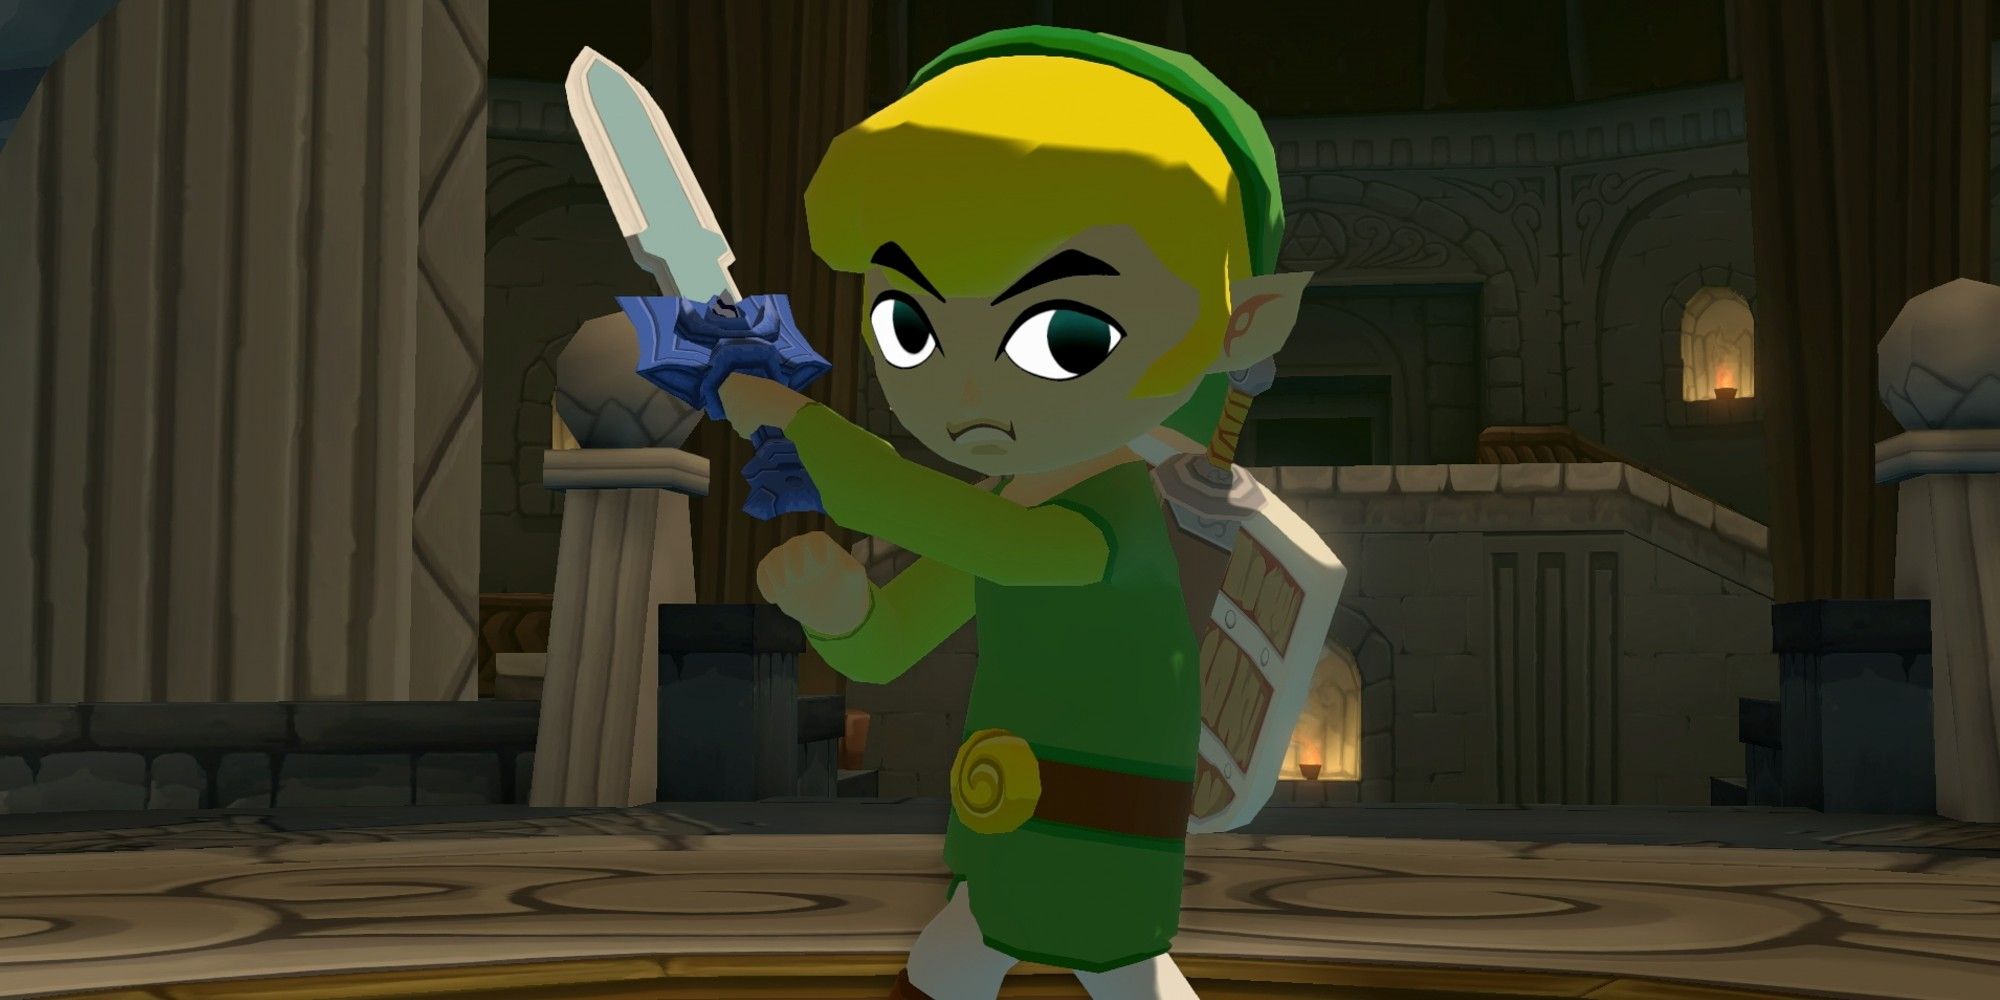 Link holding the master sword inside a dungeon.